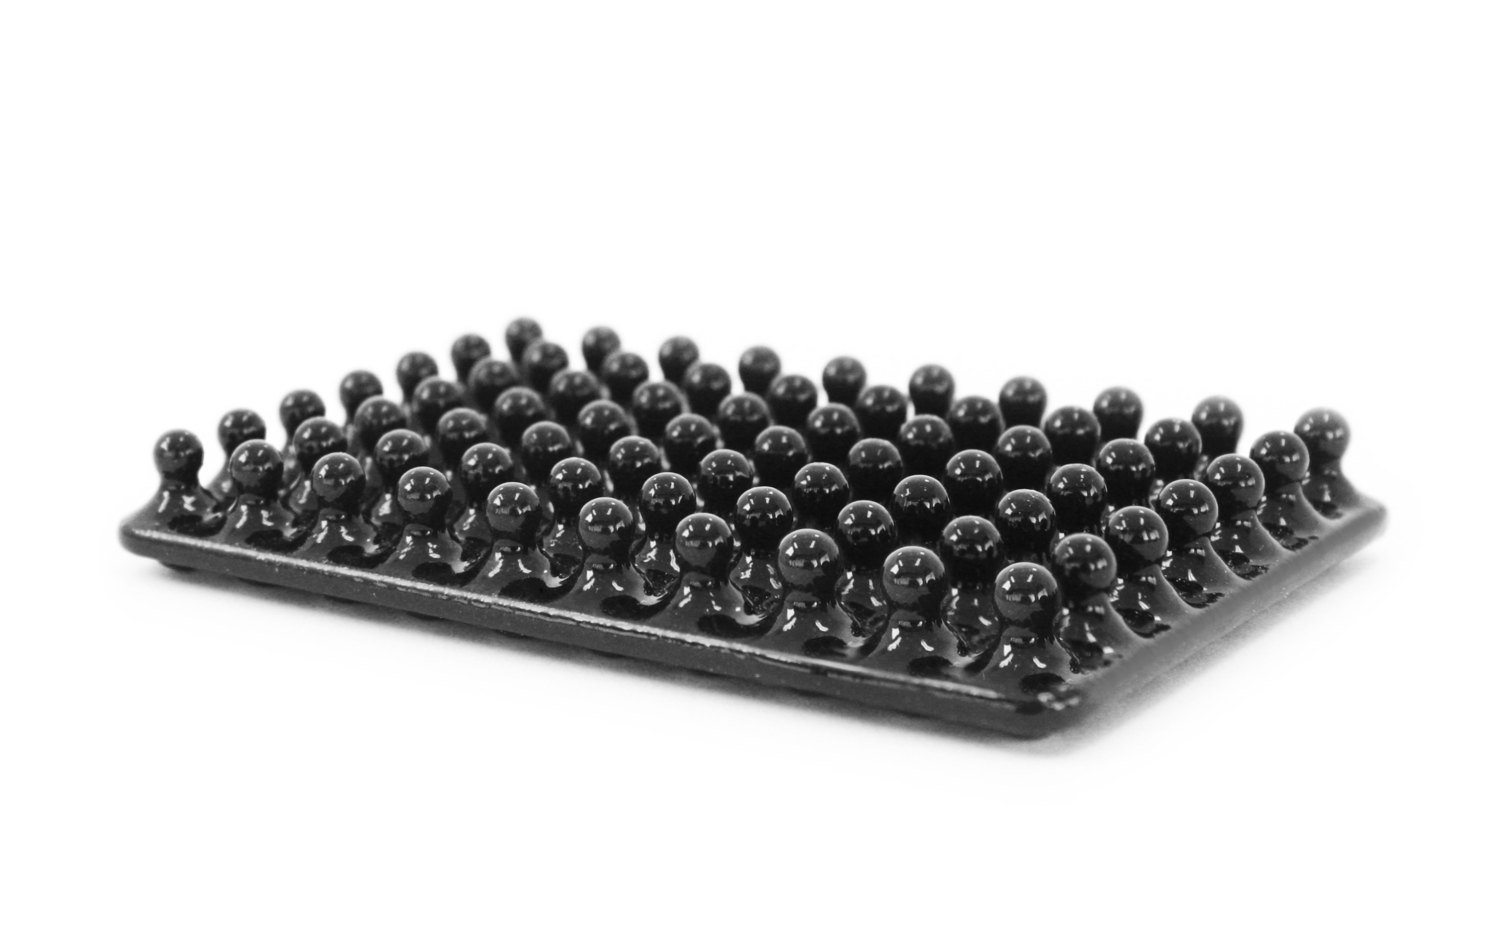 Black ceramic soap dish with lots of little balls in rows